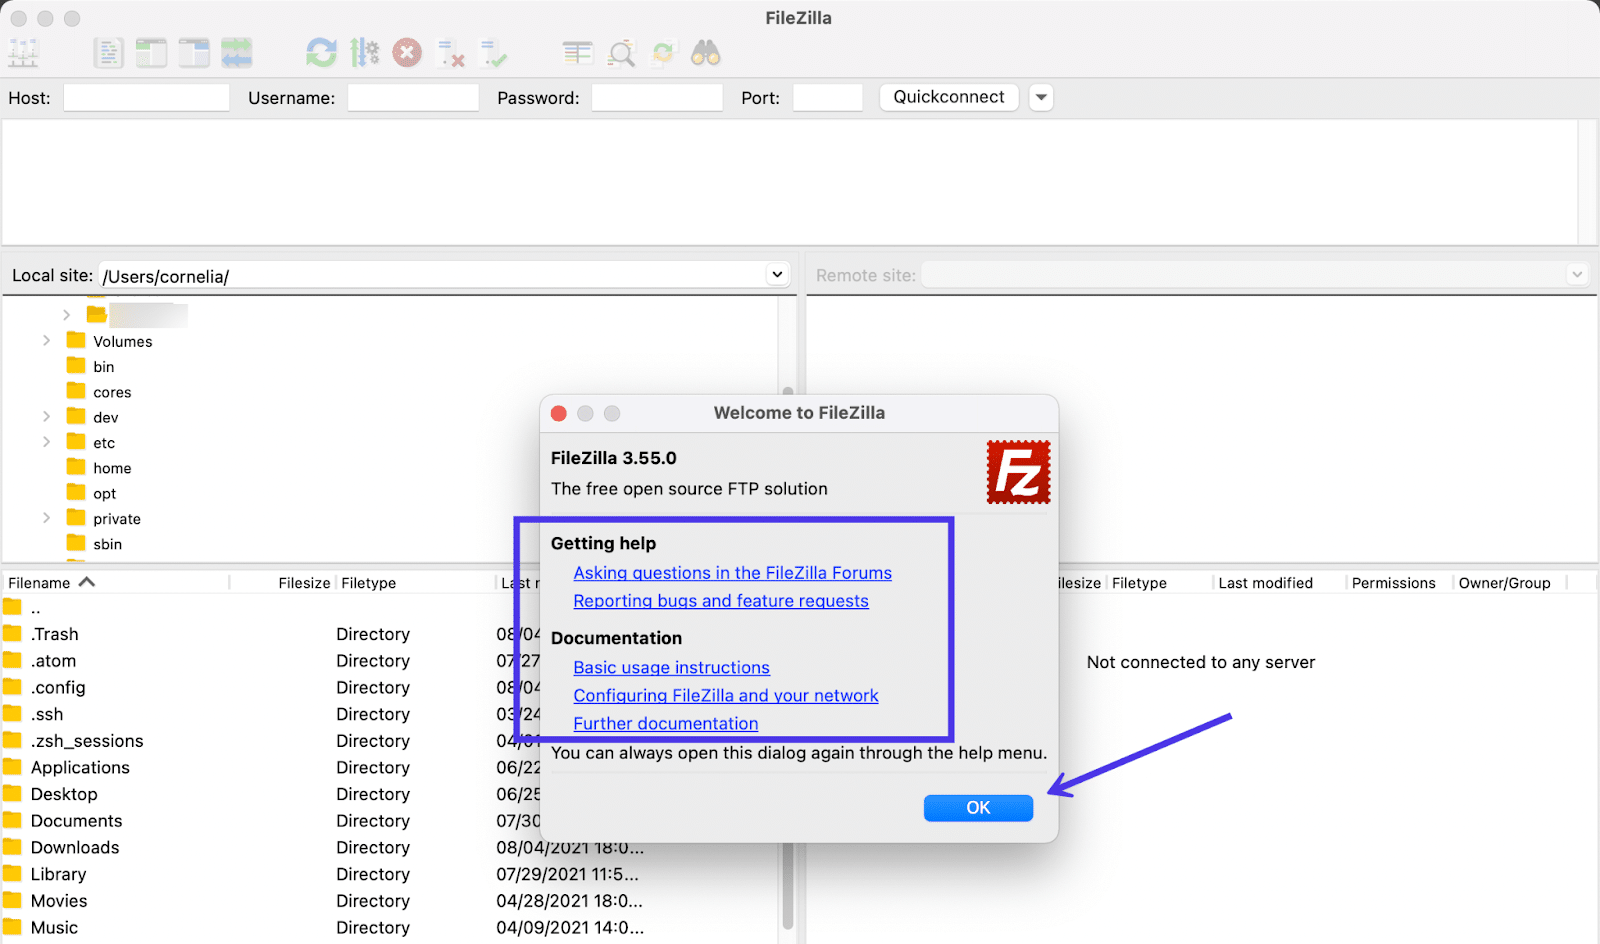 Check out FileZilla's support documents or proceed to the program by clicking OK.